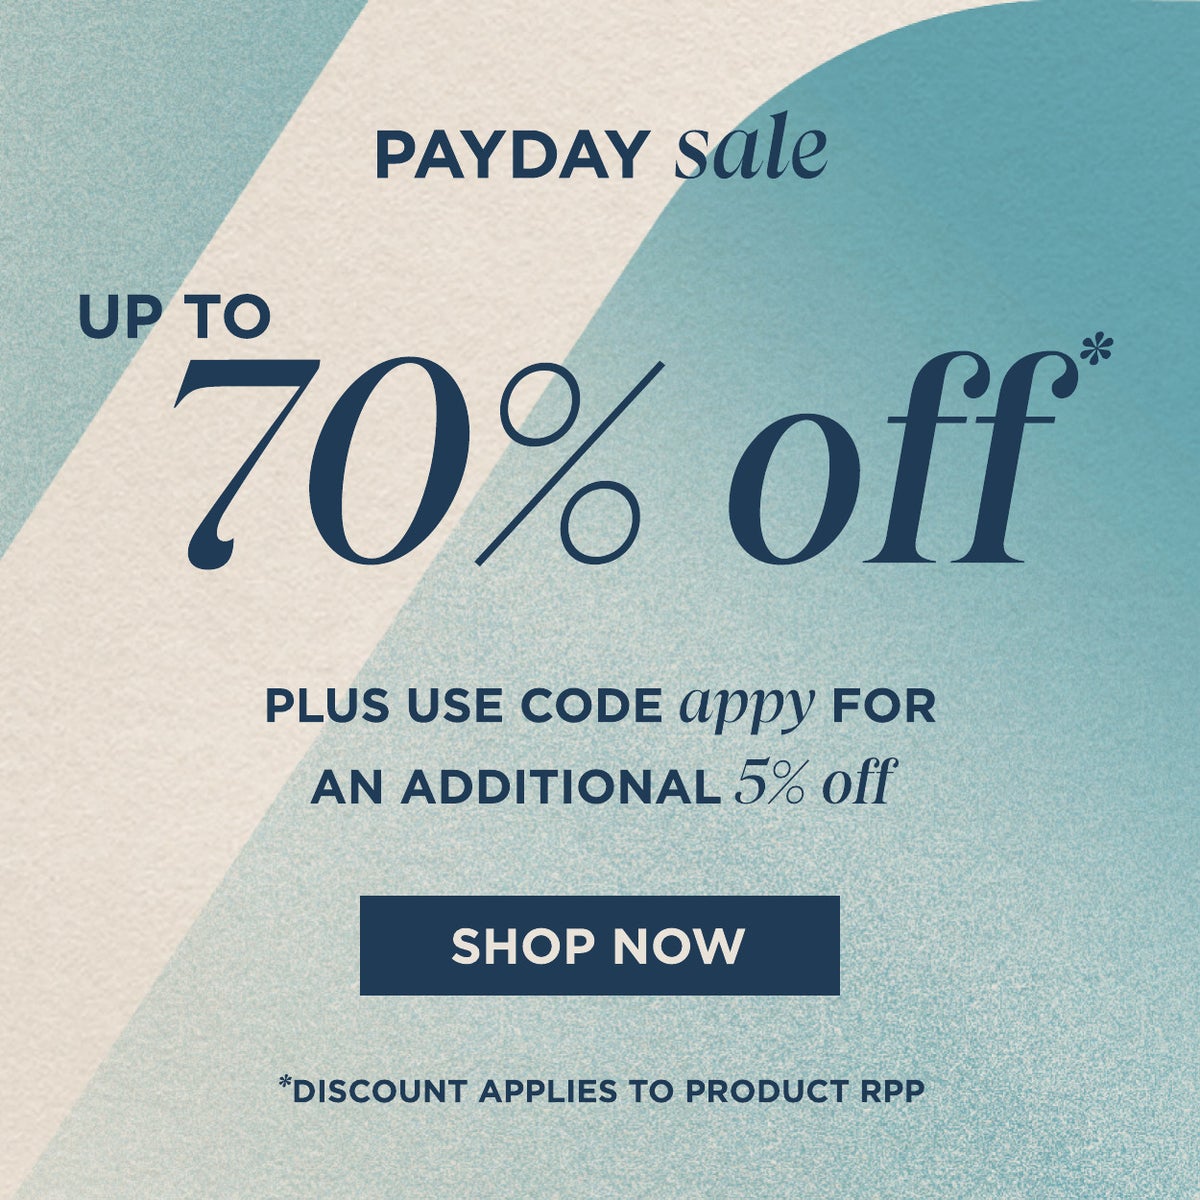 Payday sale. Up to 70% off plus save an additional 5% off. Use code APPY * Discount applies to product rrp at basket. shop now.